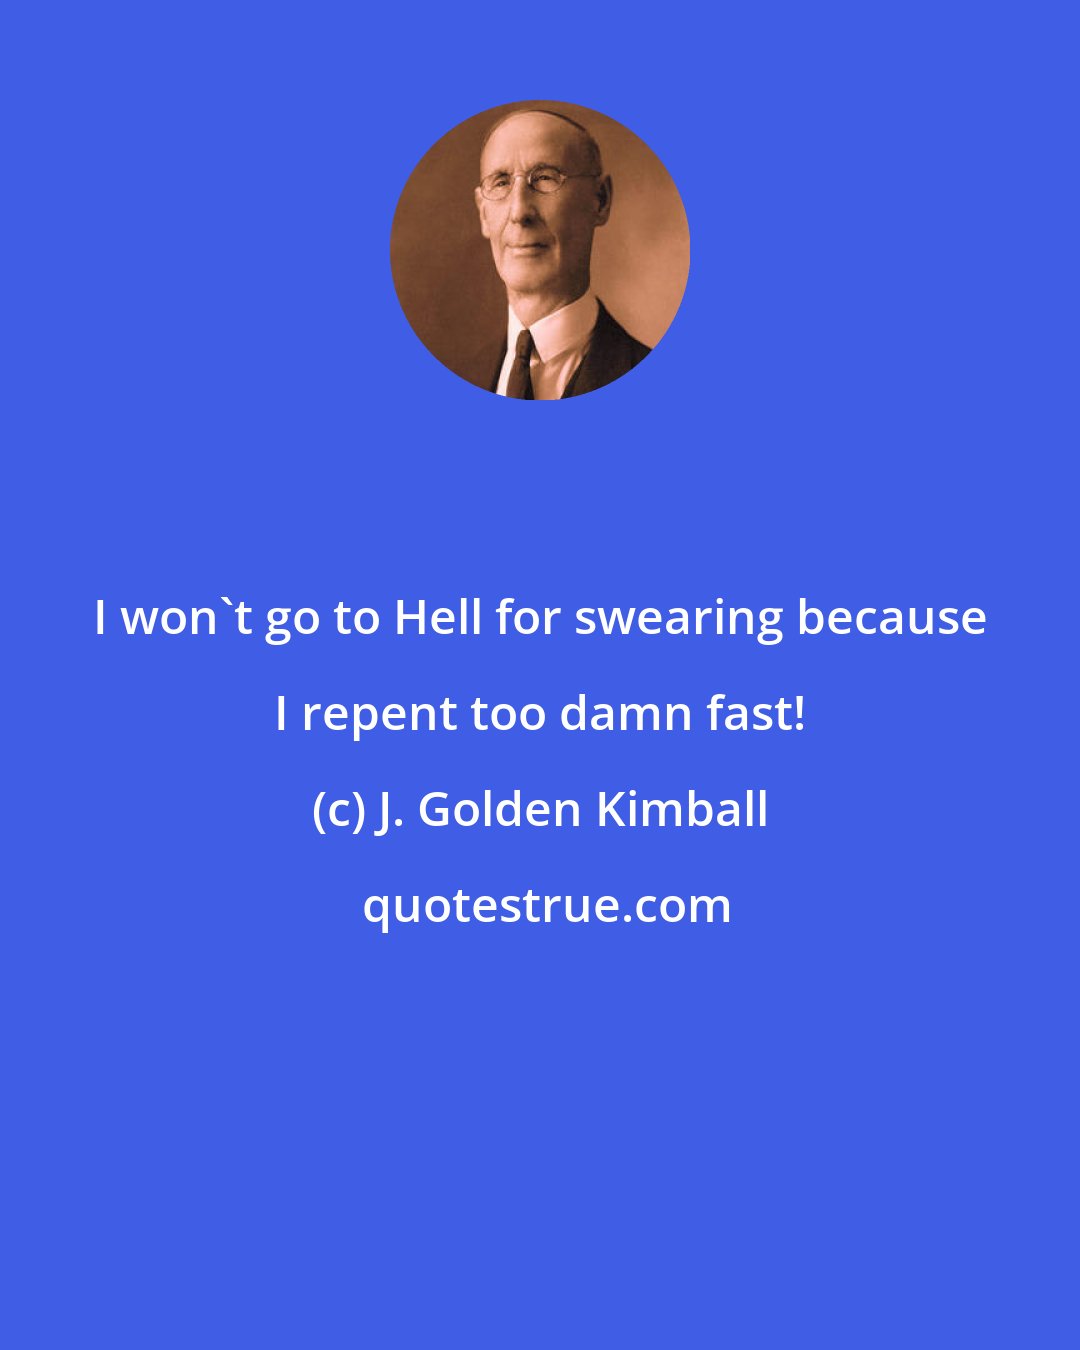 J. Golden Kimball: I won't go to Hell for swearing because I repent too damn fast!